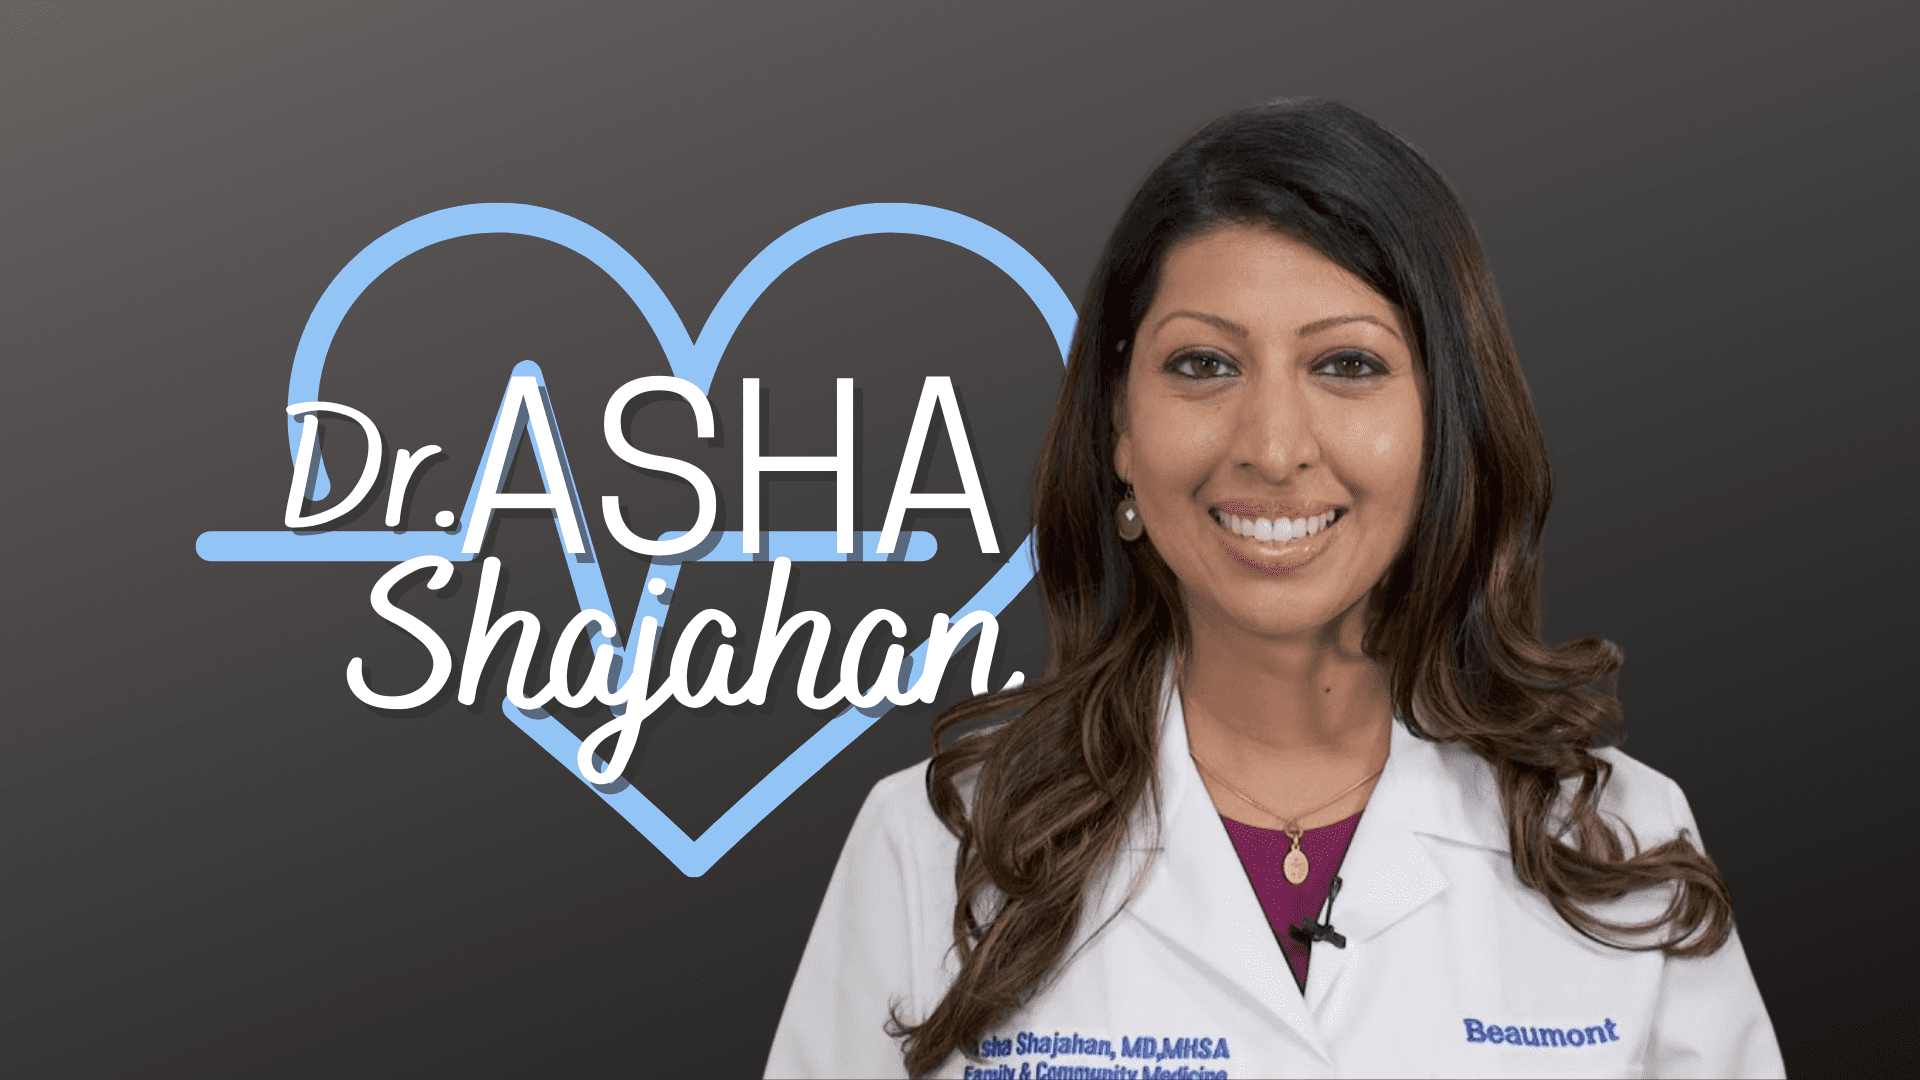 A conversation with Dr. Asha Shajahan, thought leader combating healthcare misinformation